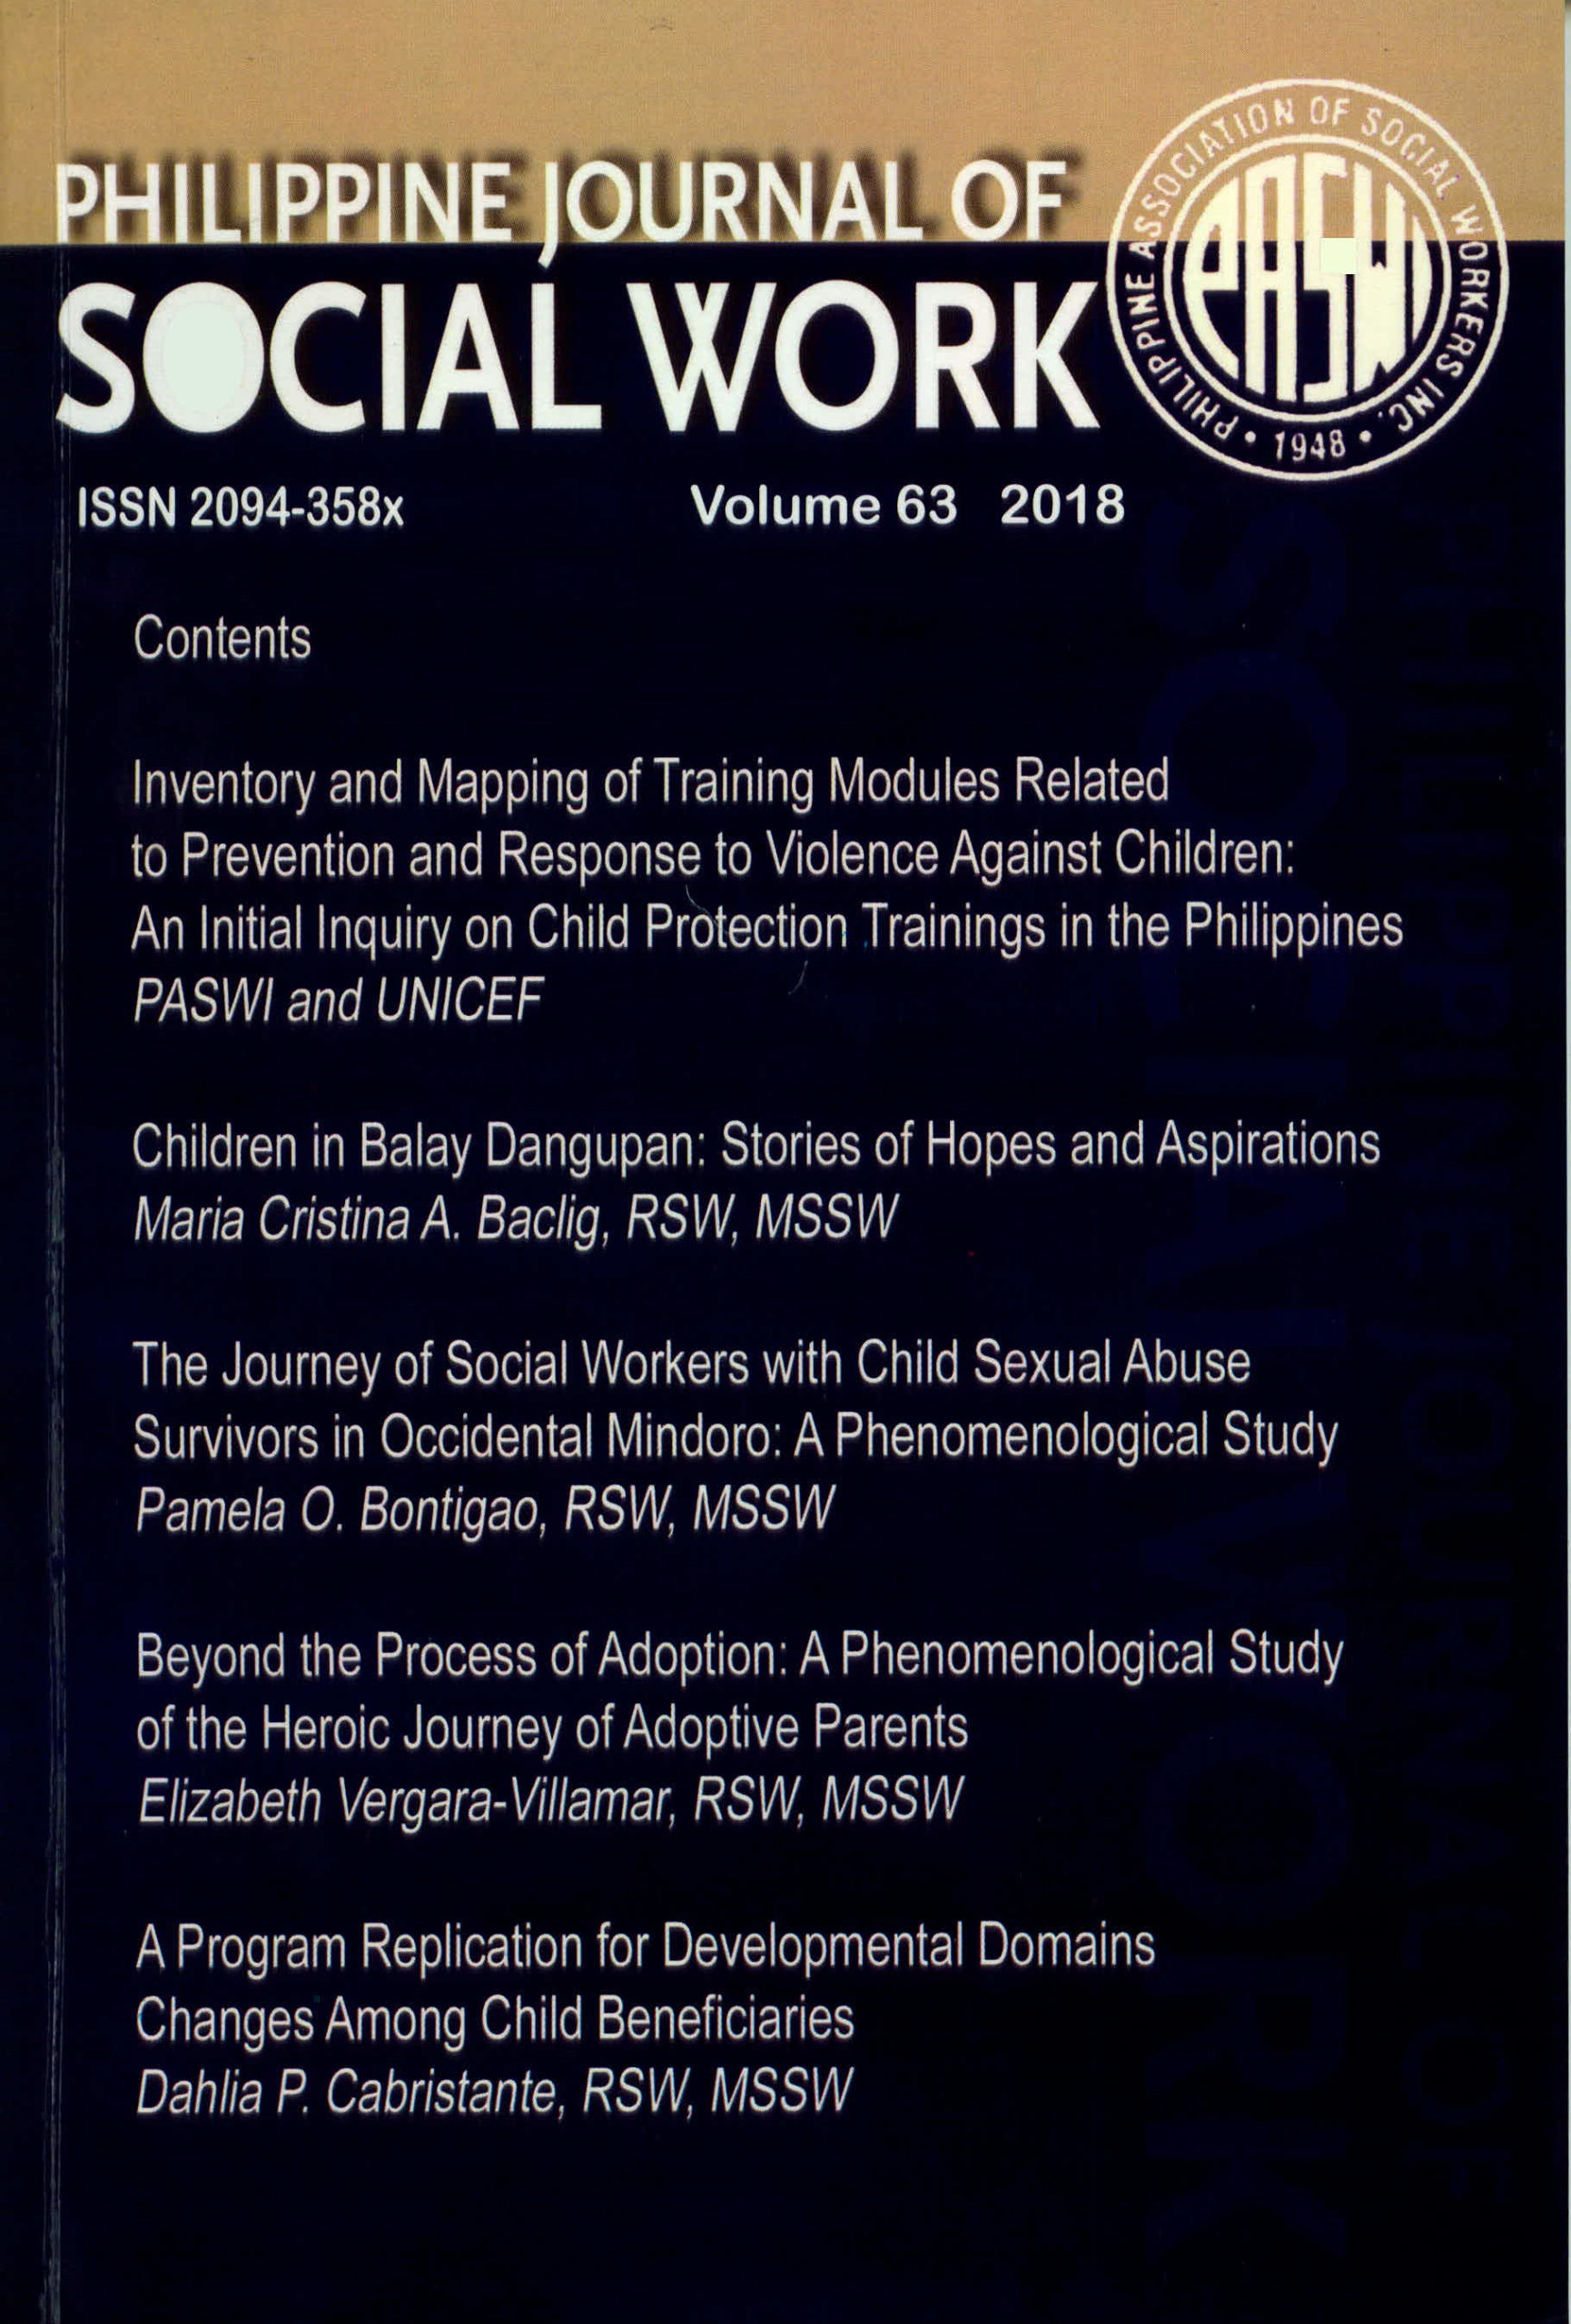 social work research topics philippines